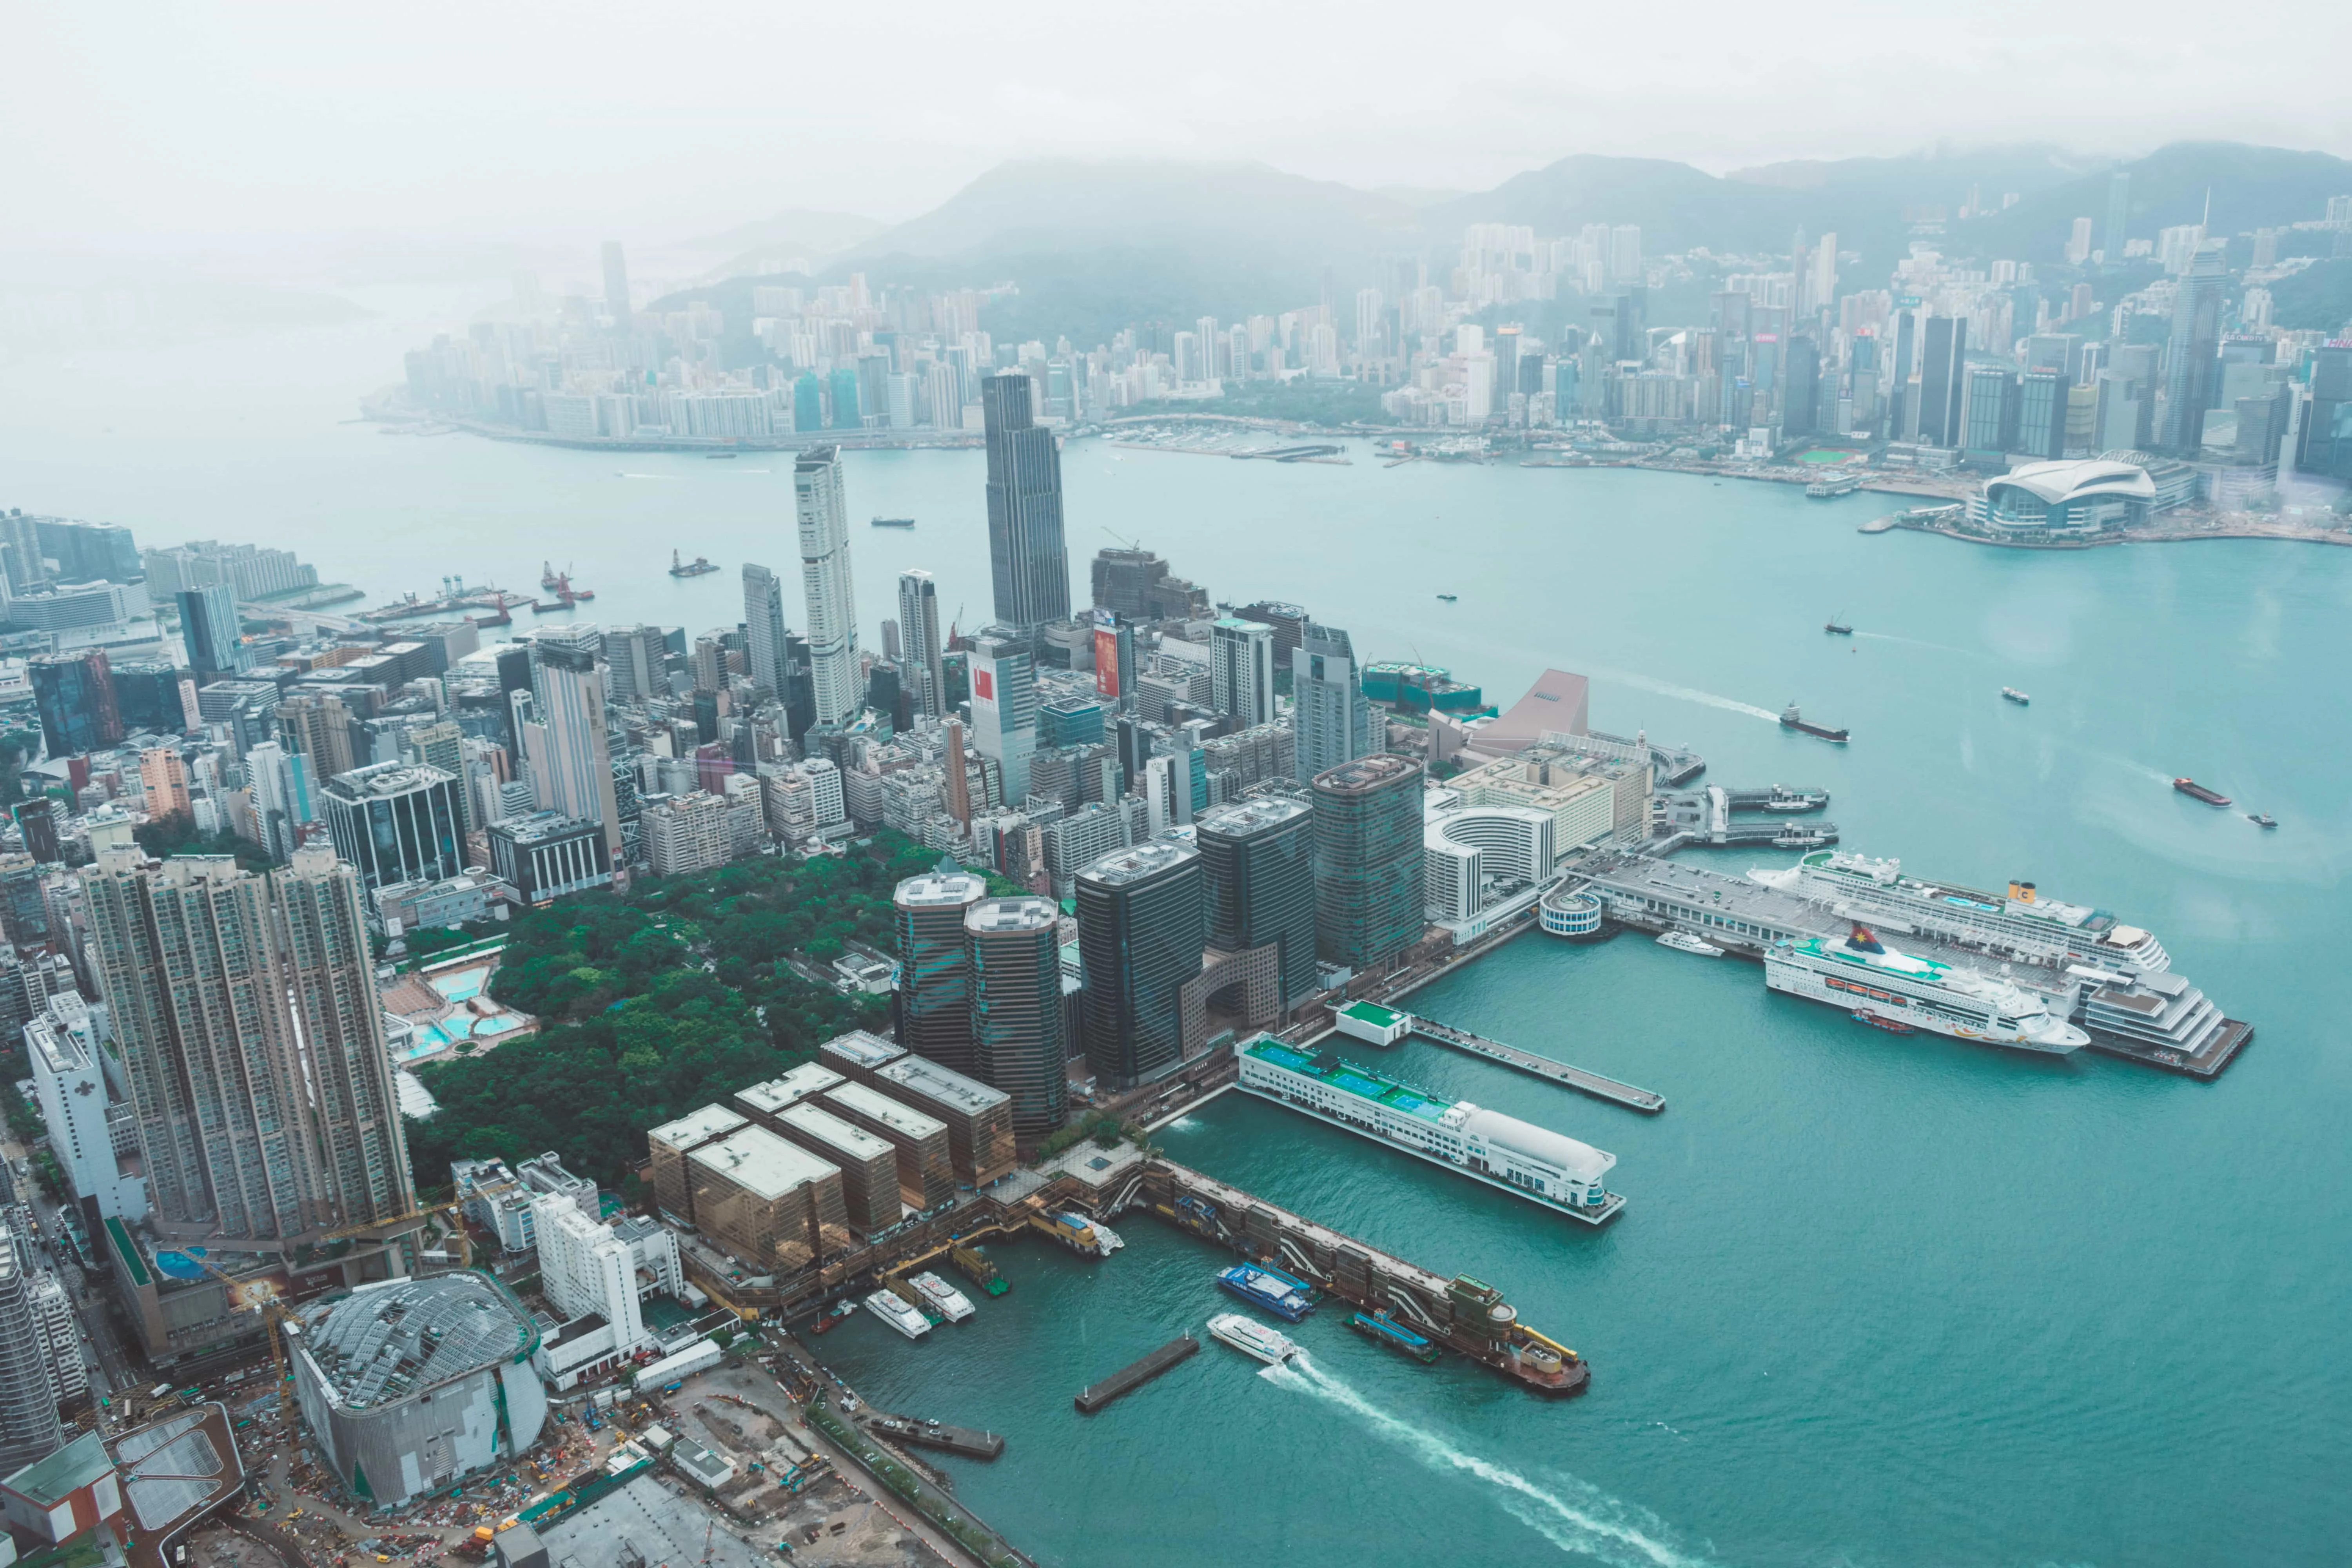 Instagrammable Places in Hong Kong, skyviews from Ritz Carlton